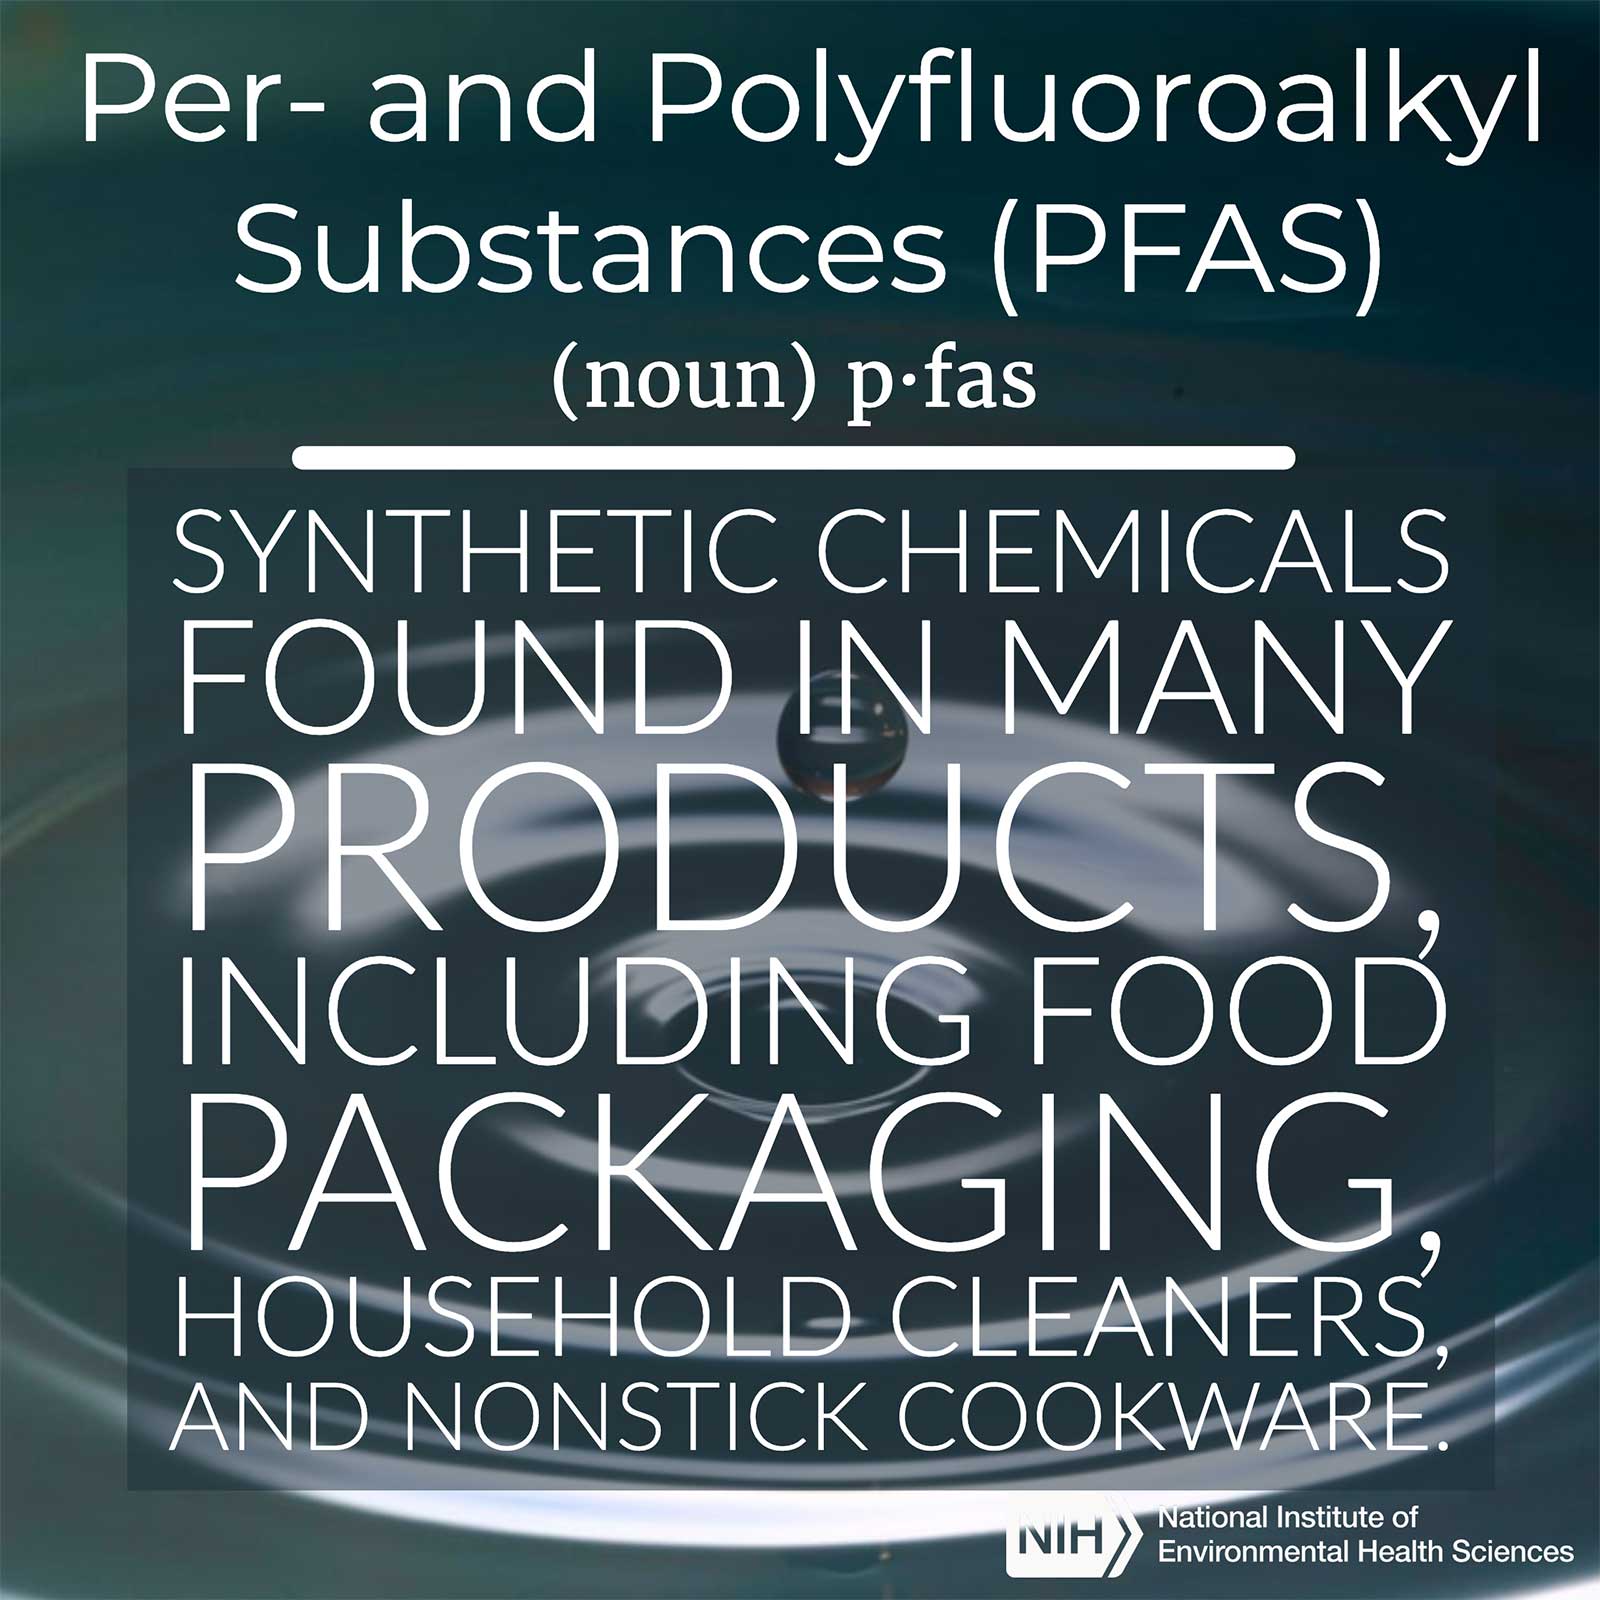 Per- and Polyfluoroalkyl Substances (PFAS) (noun) defined as &#39;synthetic chemicals found in many products, including food packaging, household cleaners and nonstick cookware.&#39;